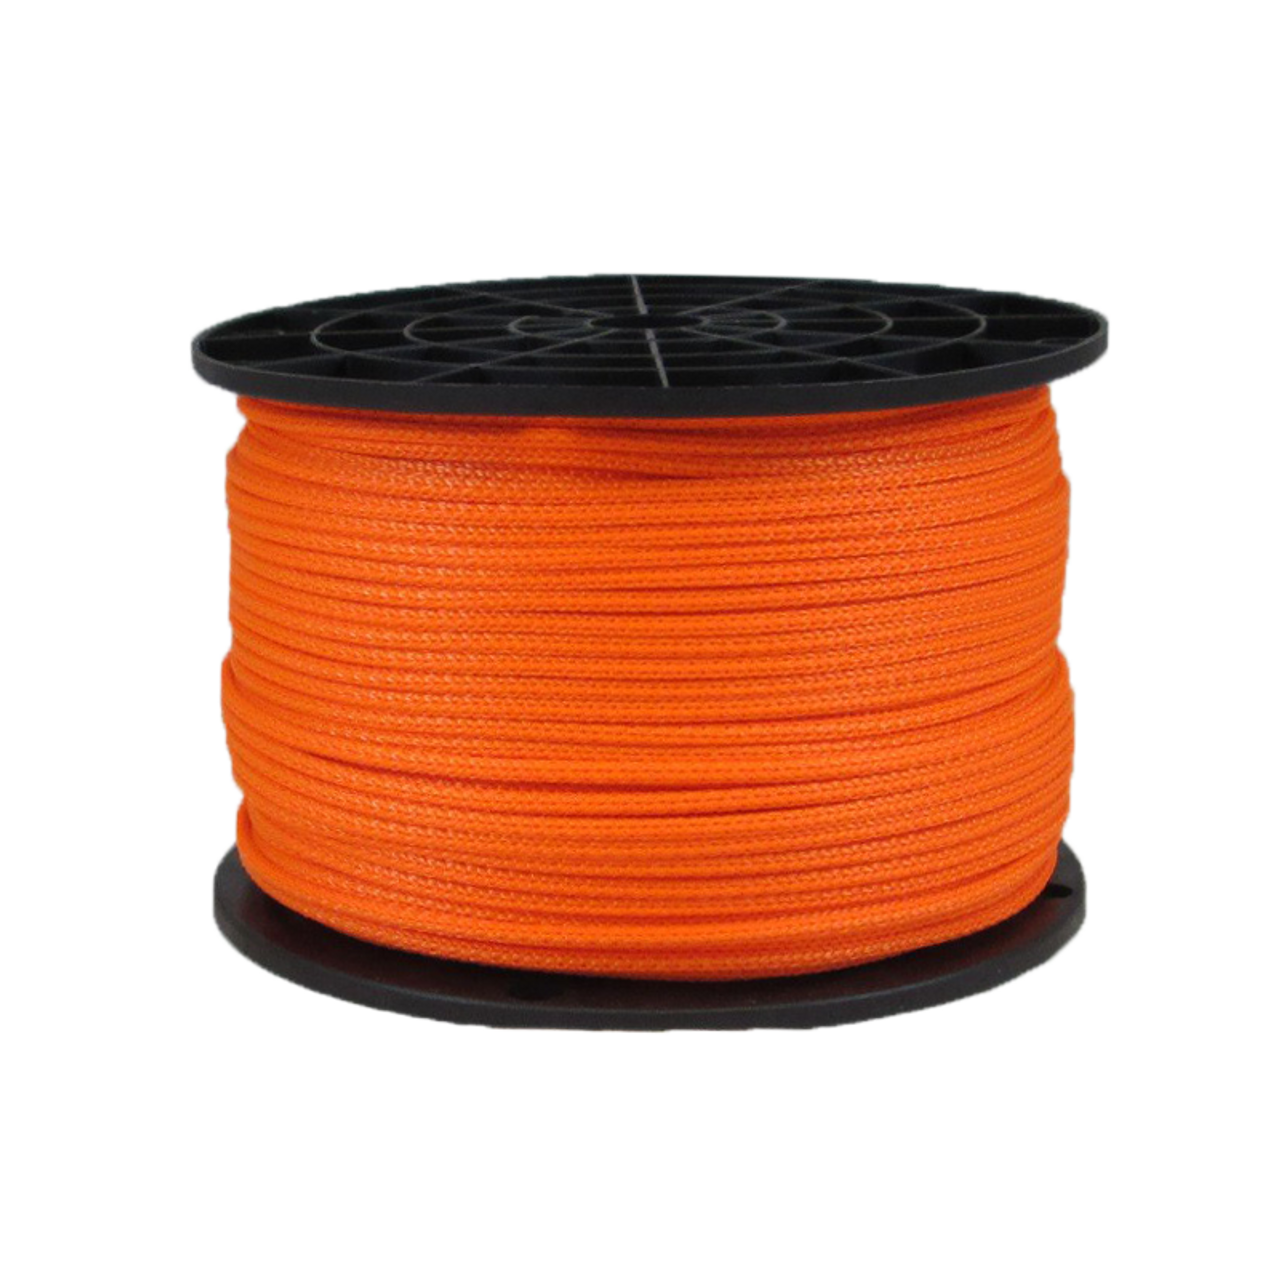 https://cdn11.bigcommerce.com/s-q3e8xwkqd2/images/stencil/1280x1280/products/147/463/1-8-dacron-polyester-rope-neon-orange__70206.1539880746.png?c=2